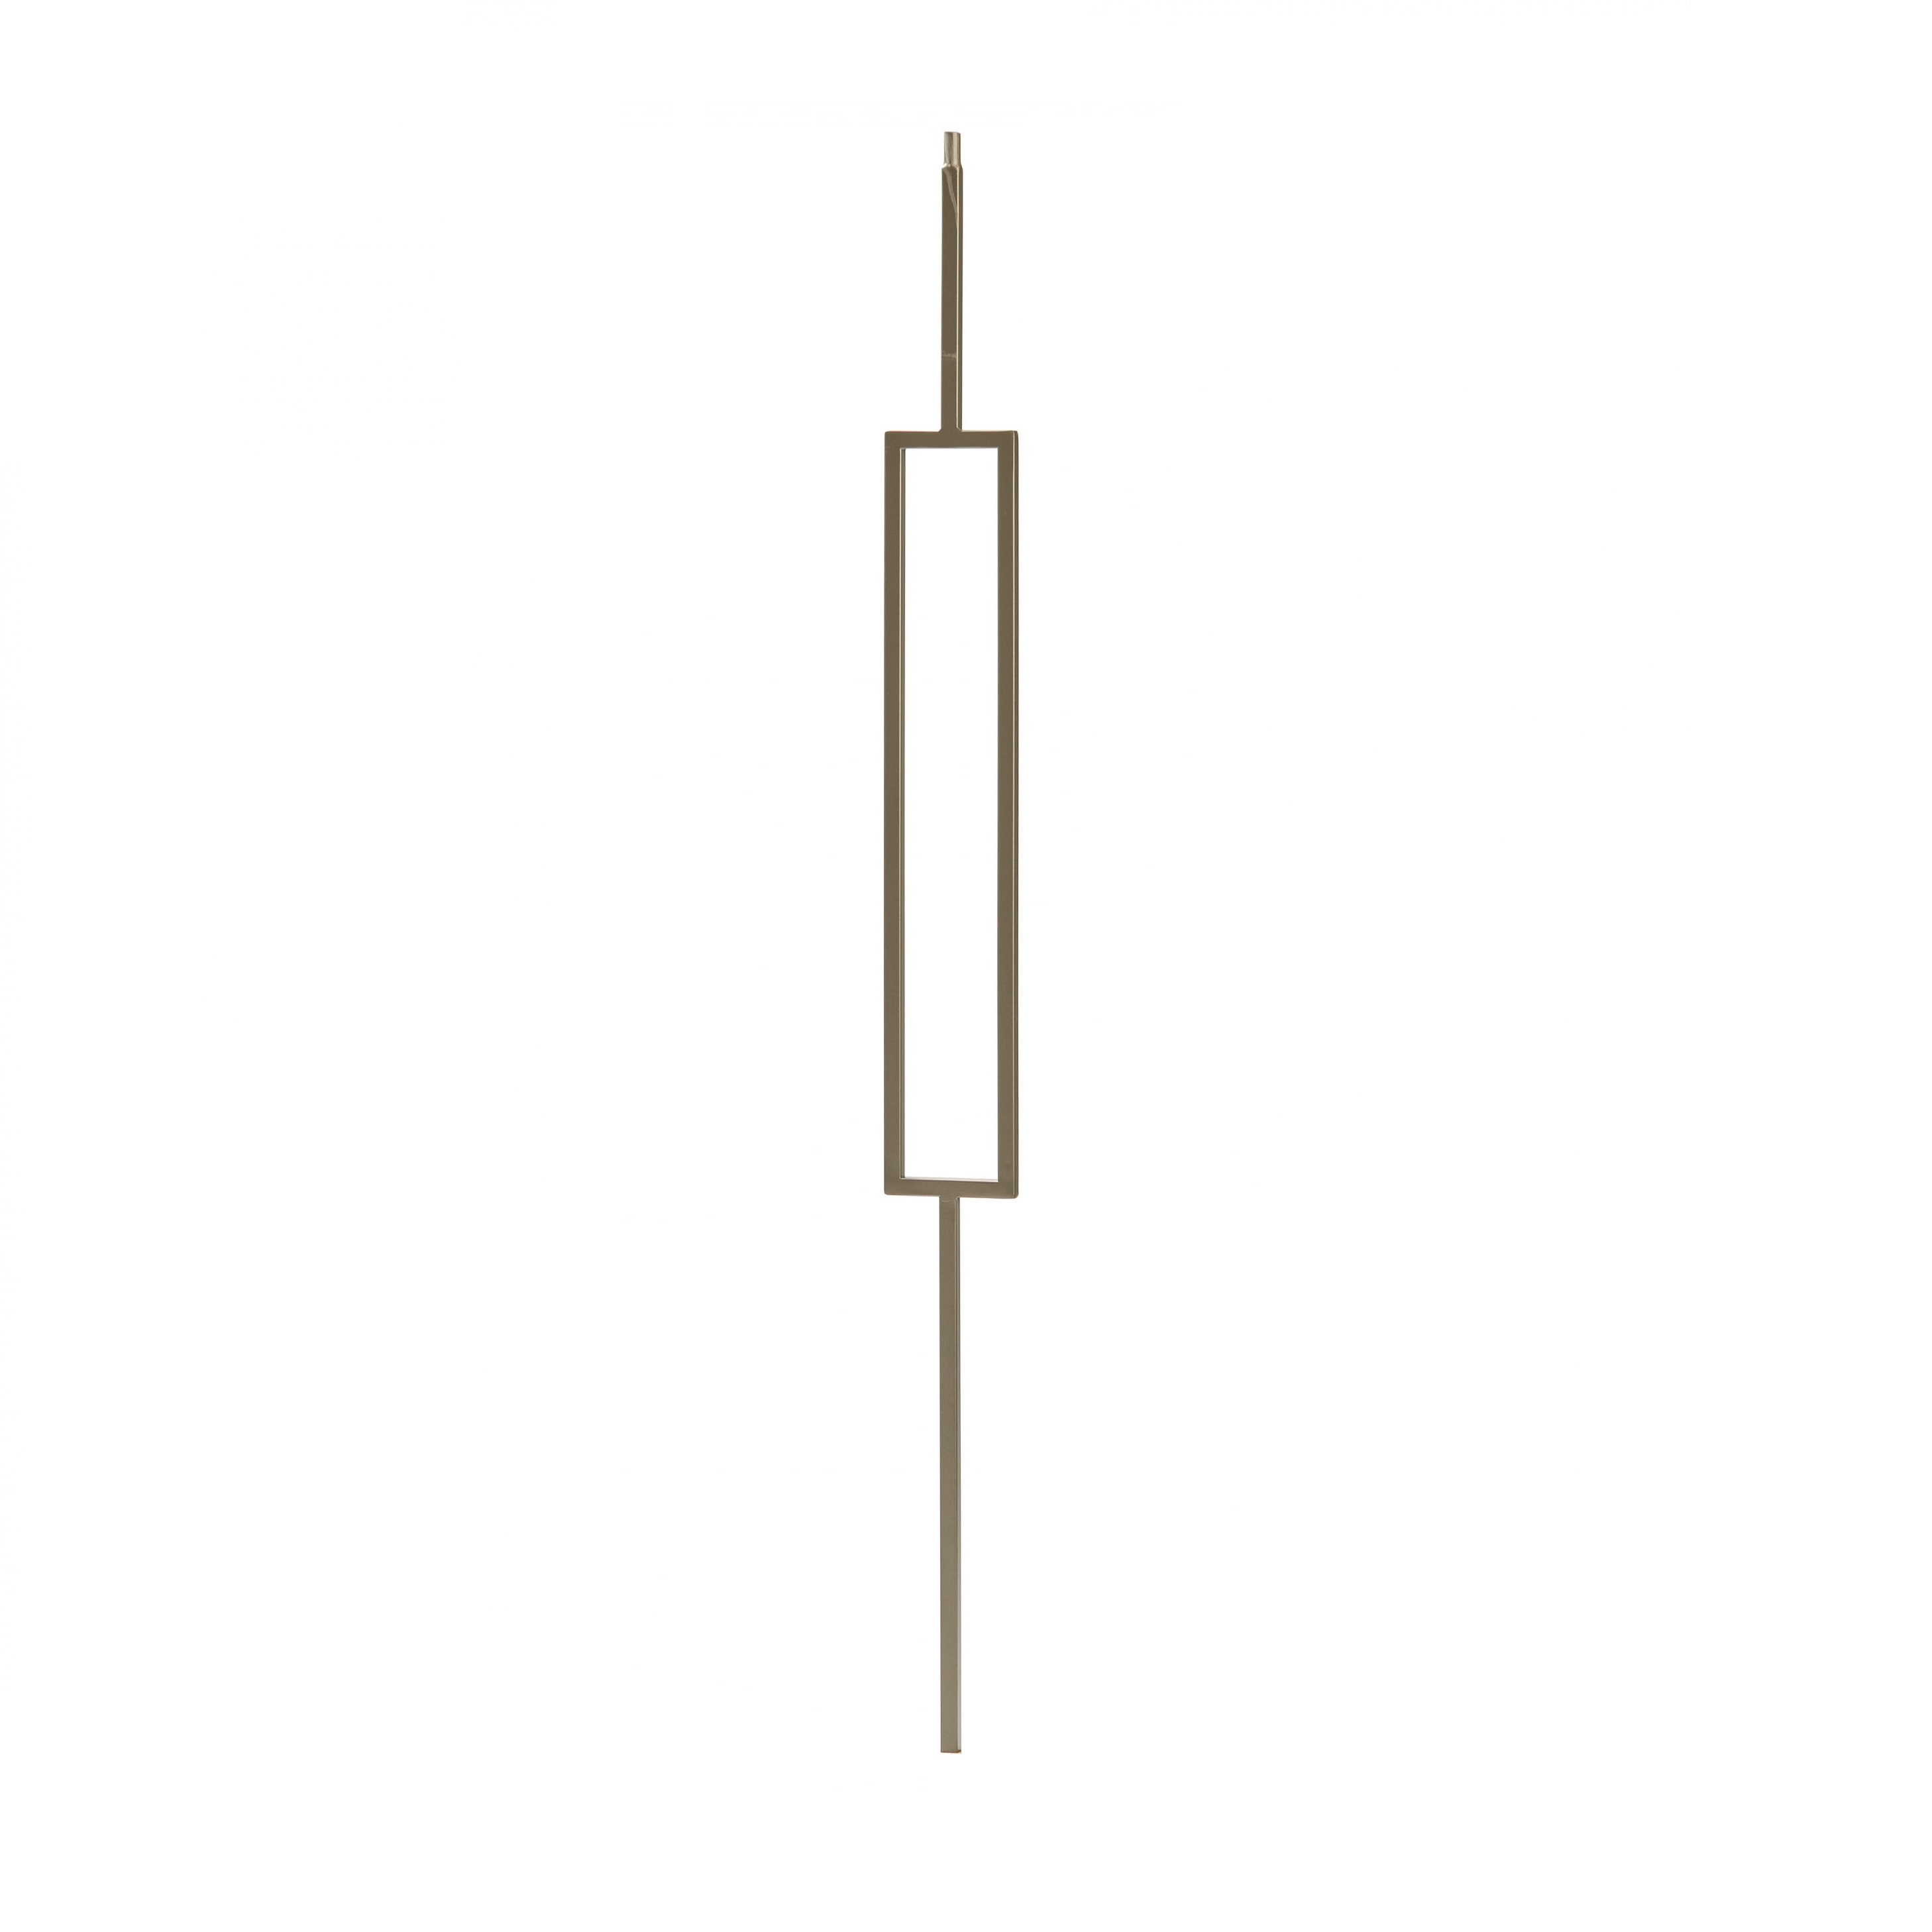 Indoor Stair Baluster - single rectangle